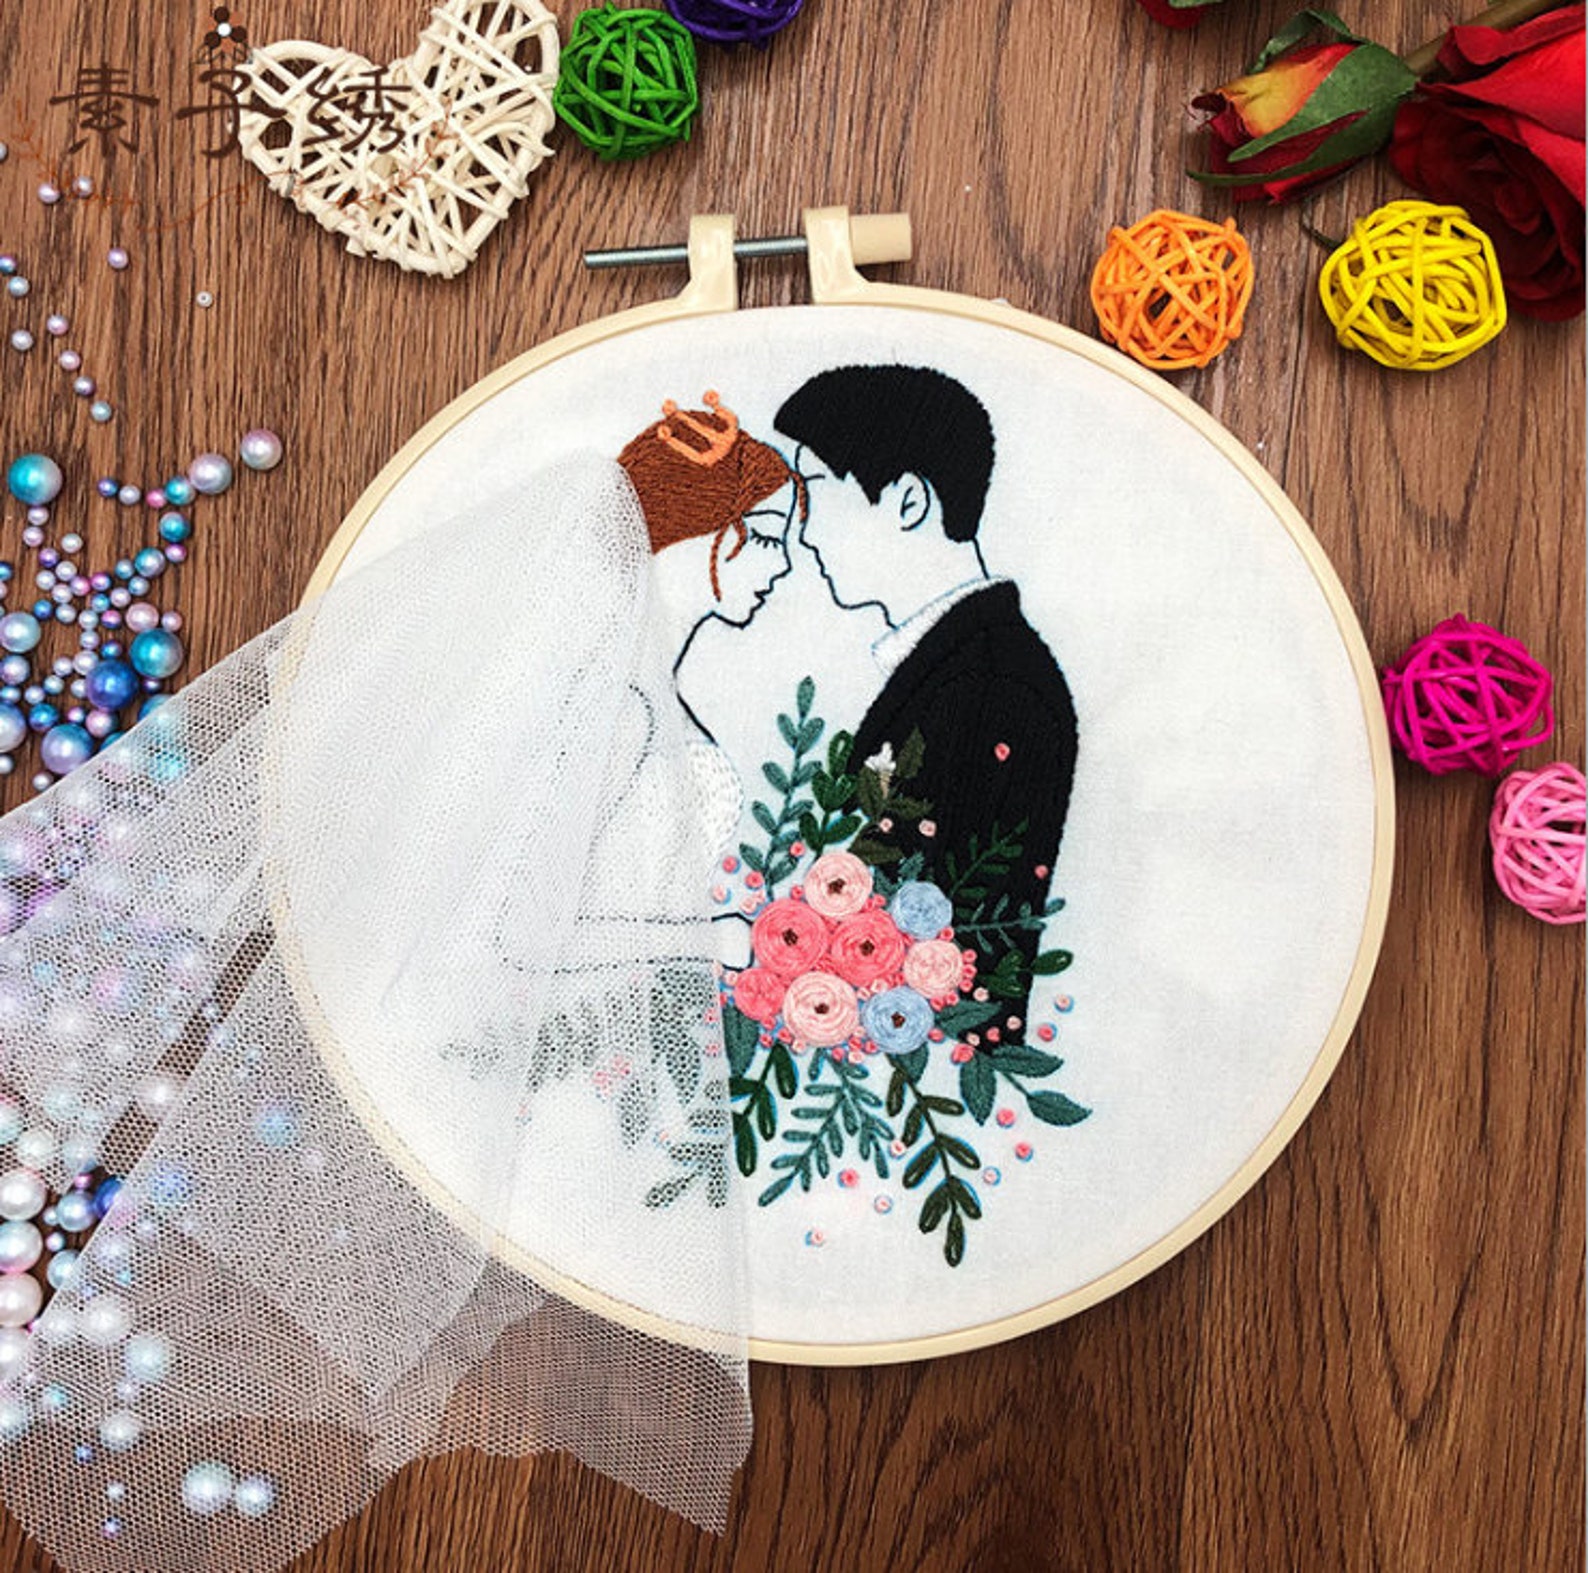 Beginner Embroidery Kit Modern Wedding Embroidery Kit with | Etsy